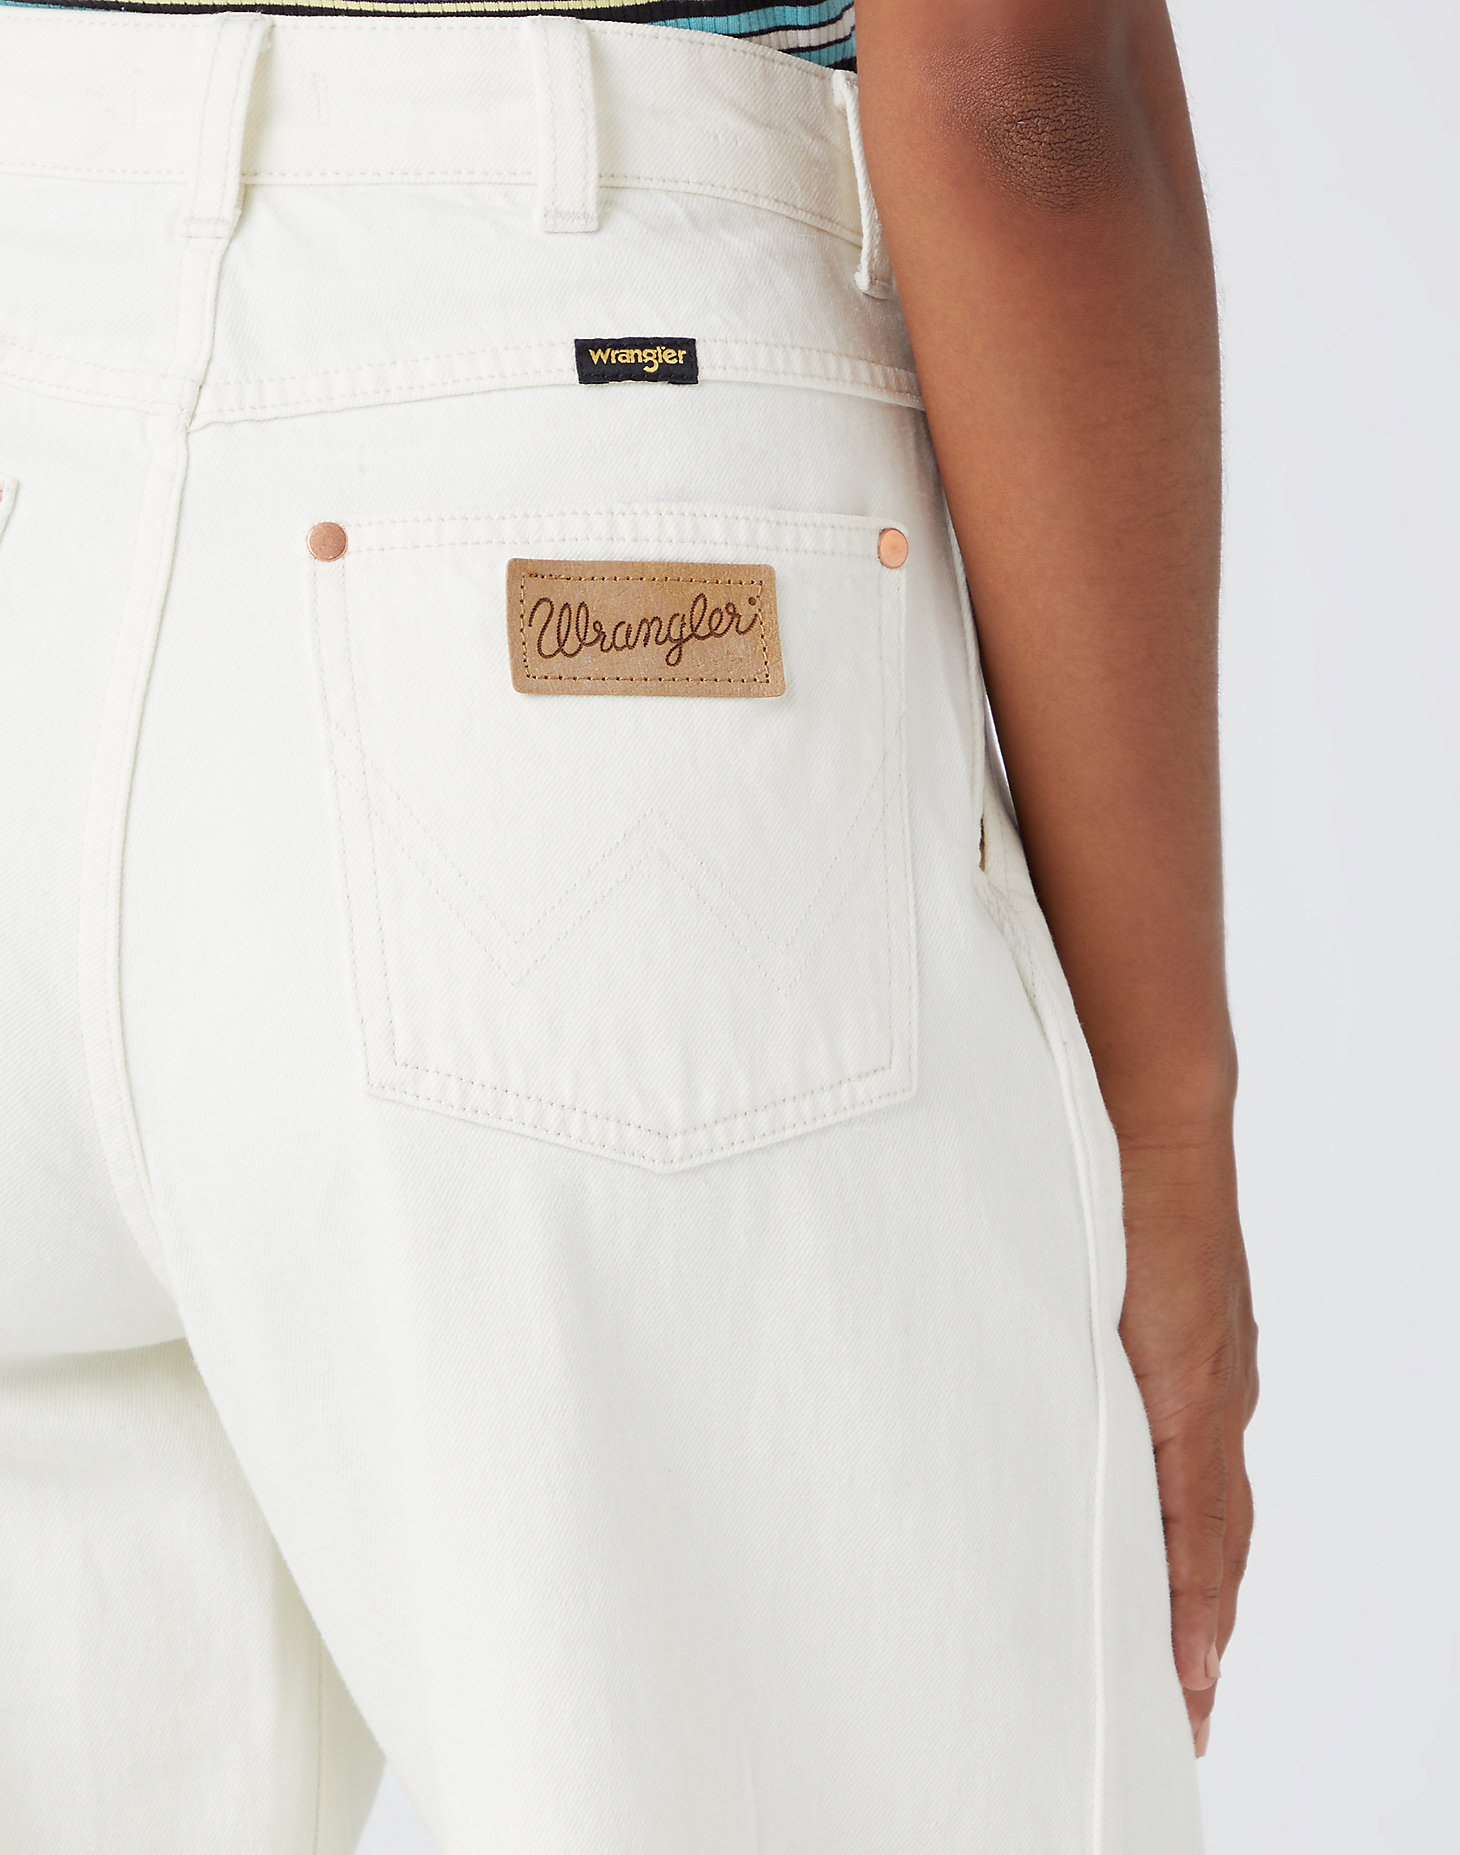 Pleated Crop Barrel Jeans in Vintage White alternative view 4